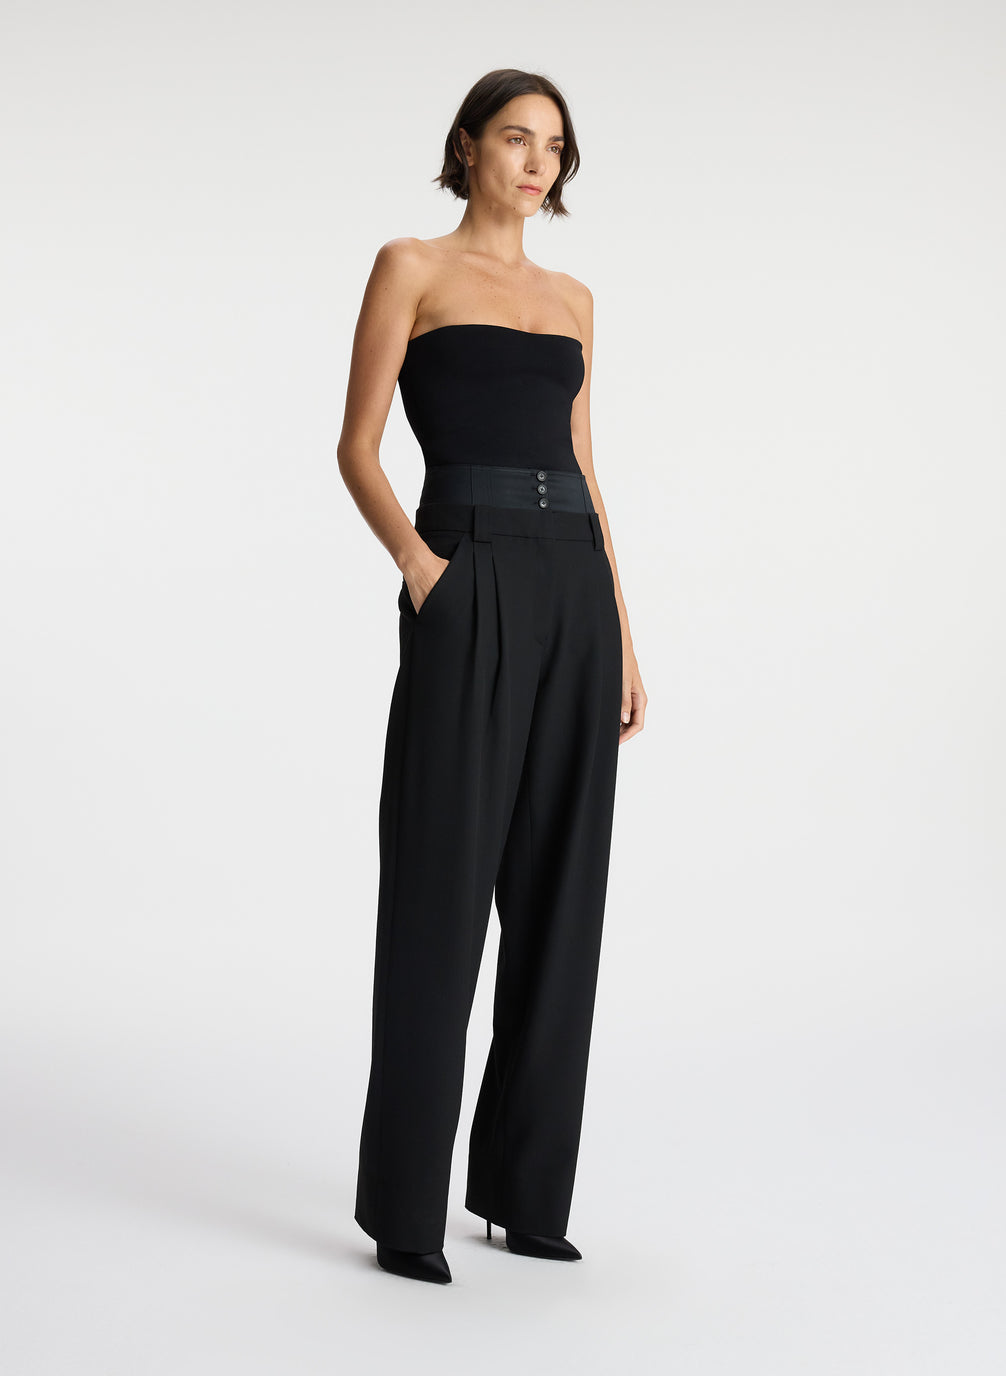 side view of woman wearing black strapless compact knit top and black satin pants